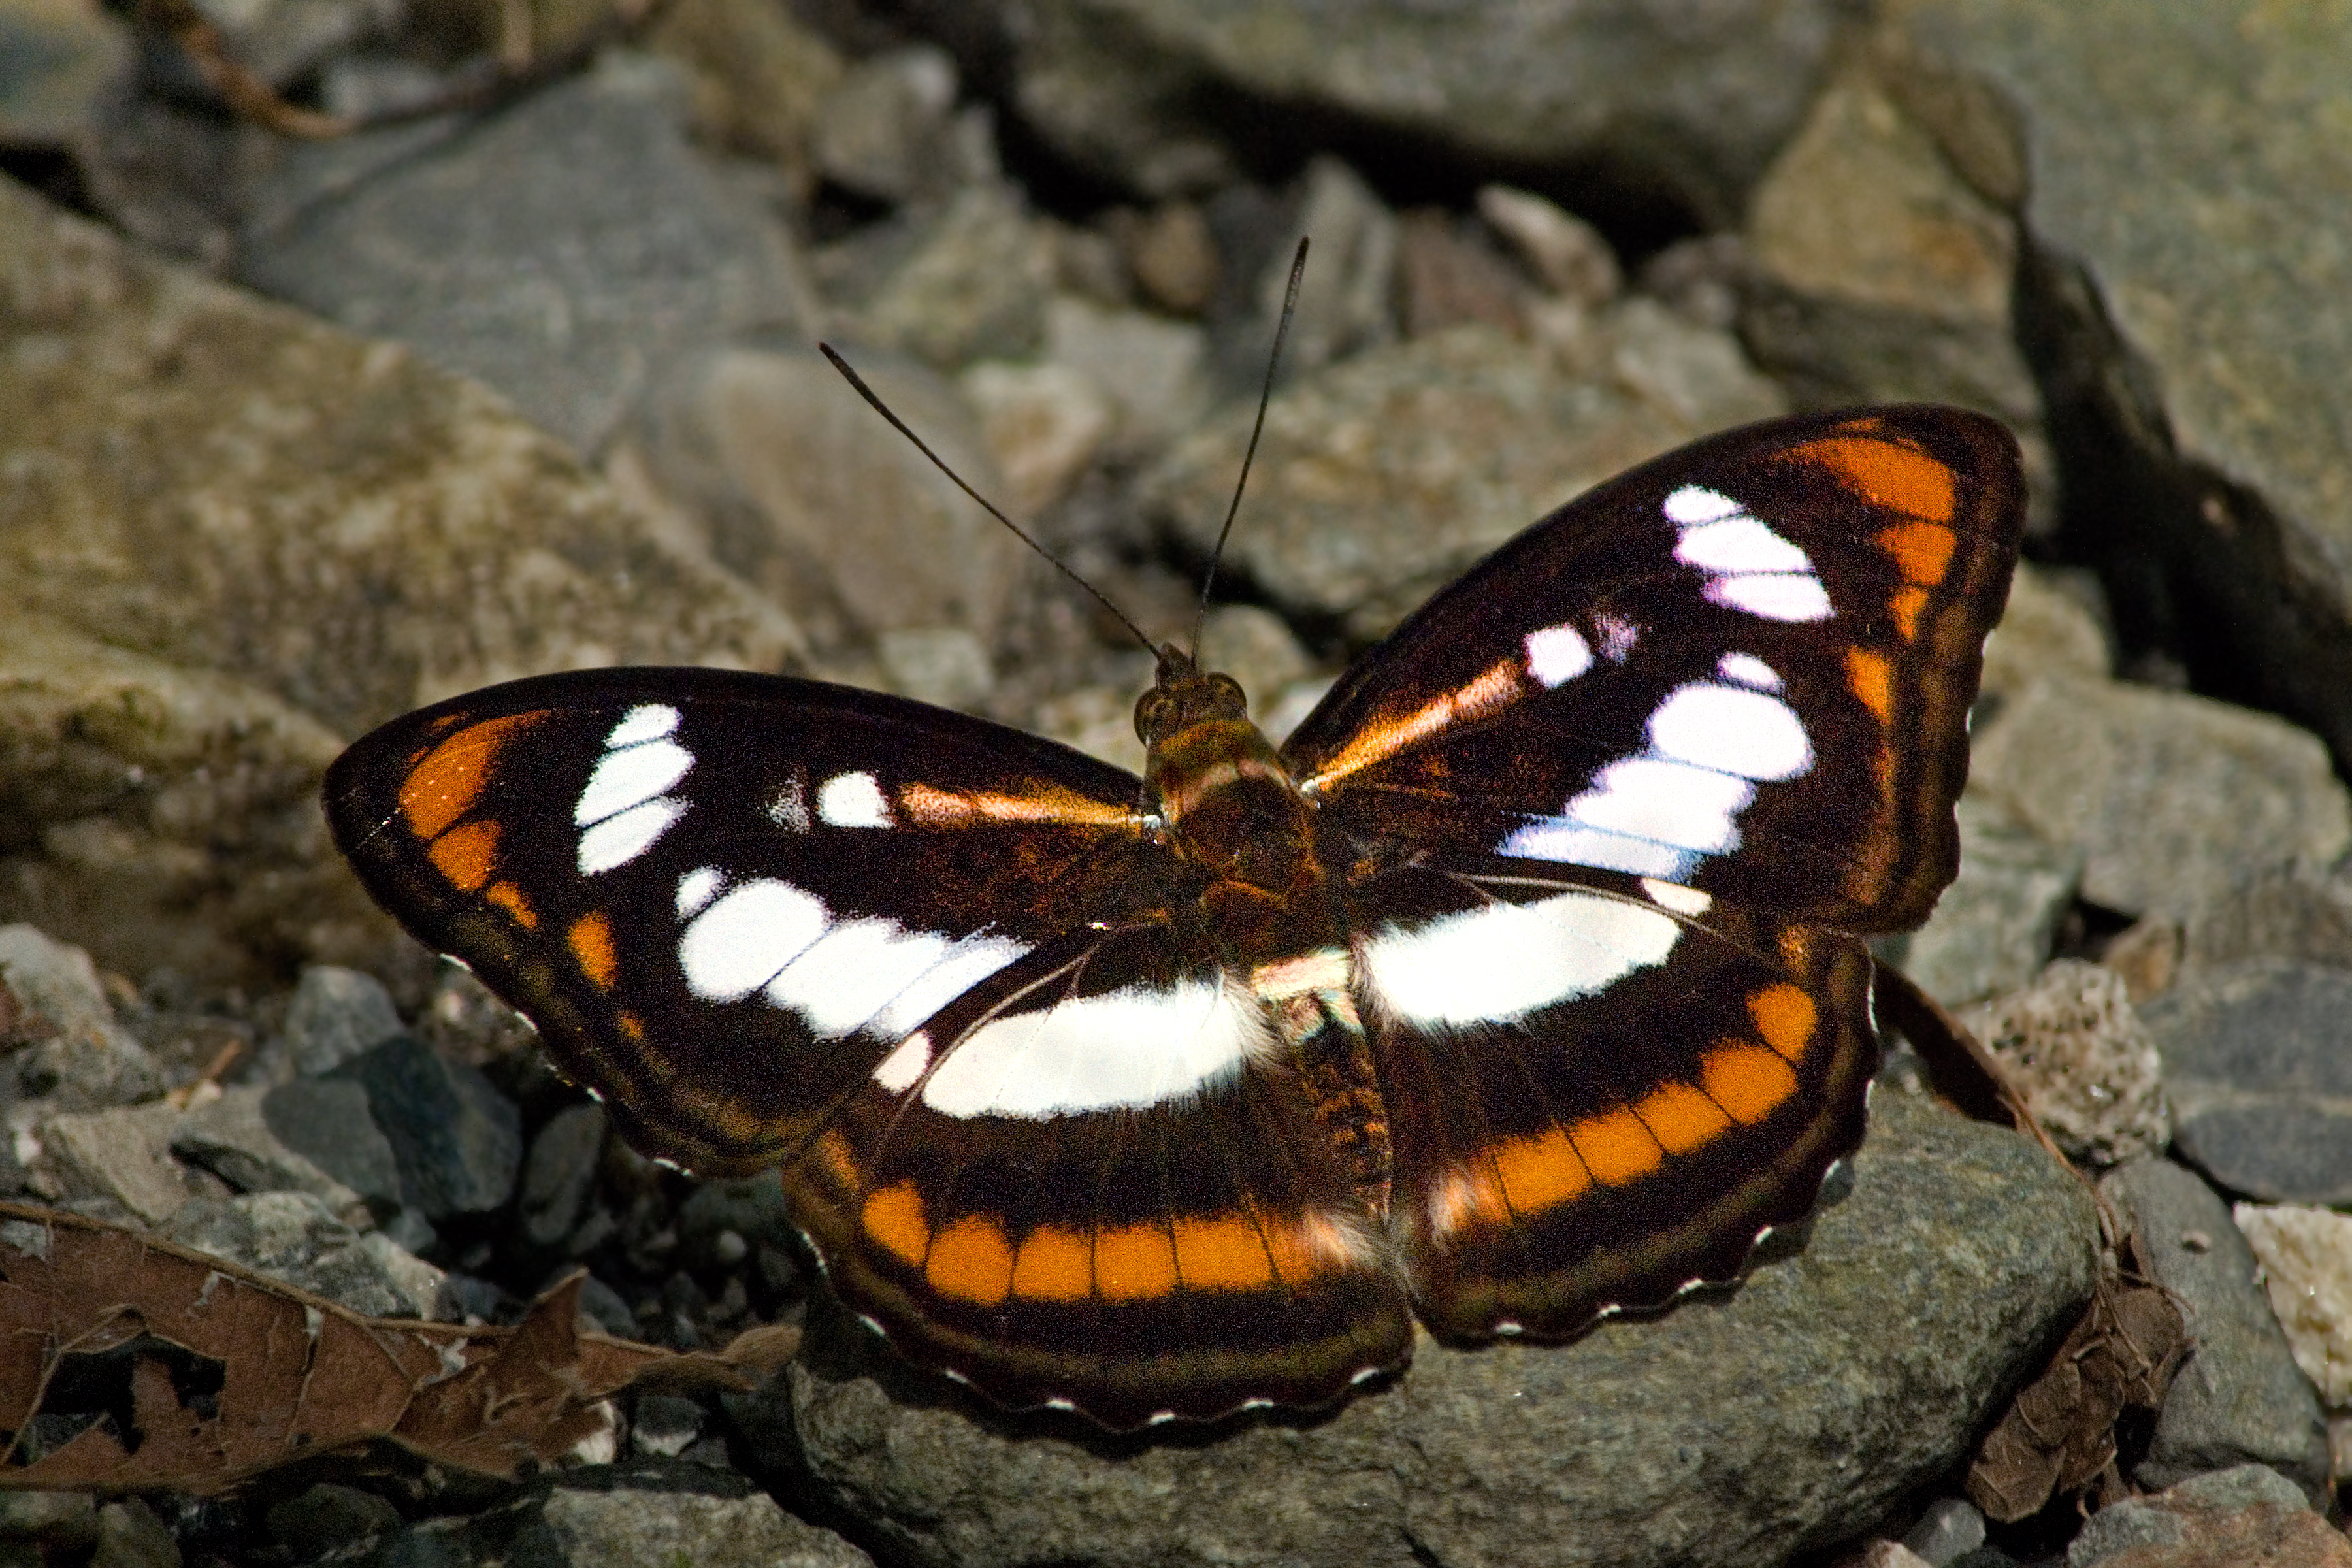 Open wing position of Athyma inara Westwood, 1850 – Colour Sergeant WLB DSC 0461